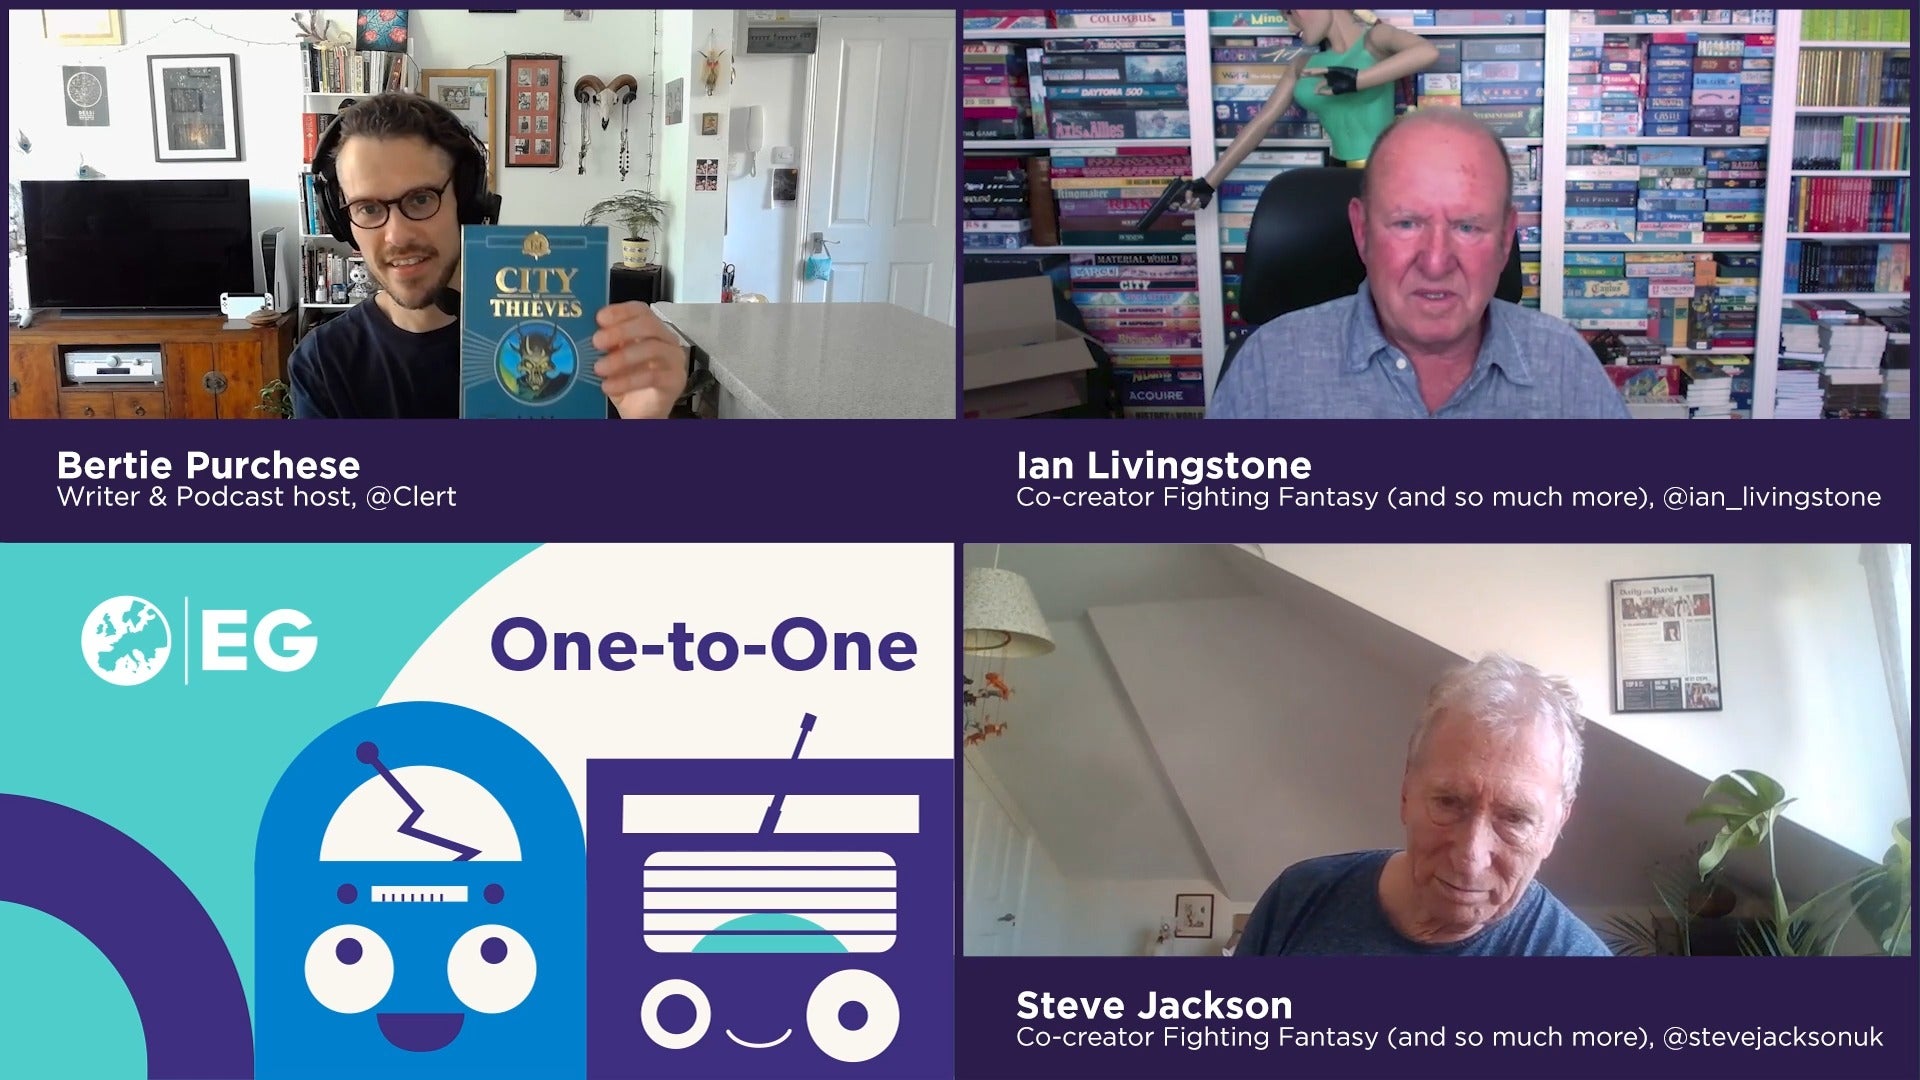 A quartered screen with three video call streams in it. Bertie is in one, holding up a Fighting Fantasy book. In the others are Ian Livingstone and Steve Jackson, the creators of Fighting Fantasy.